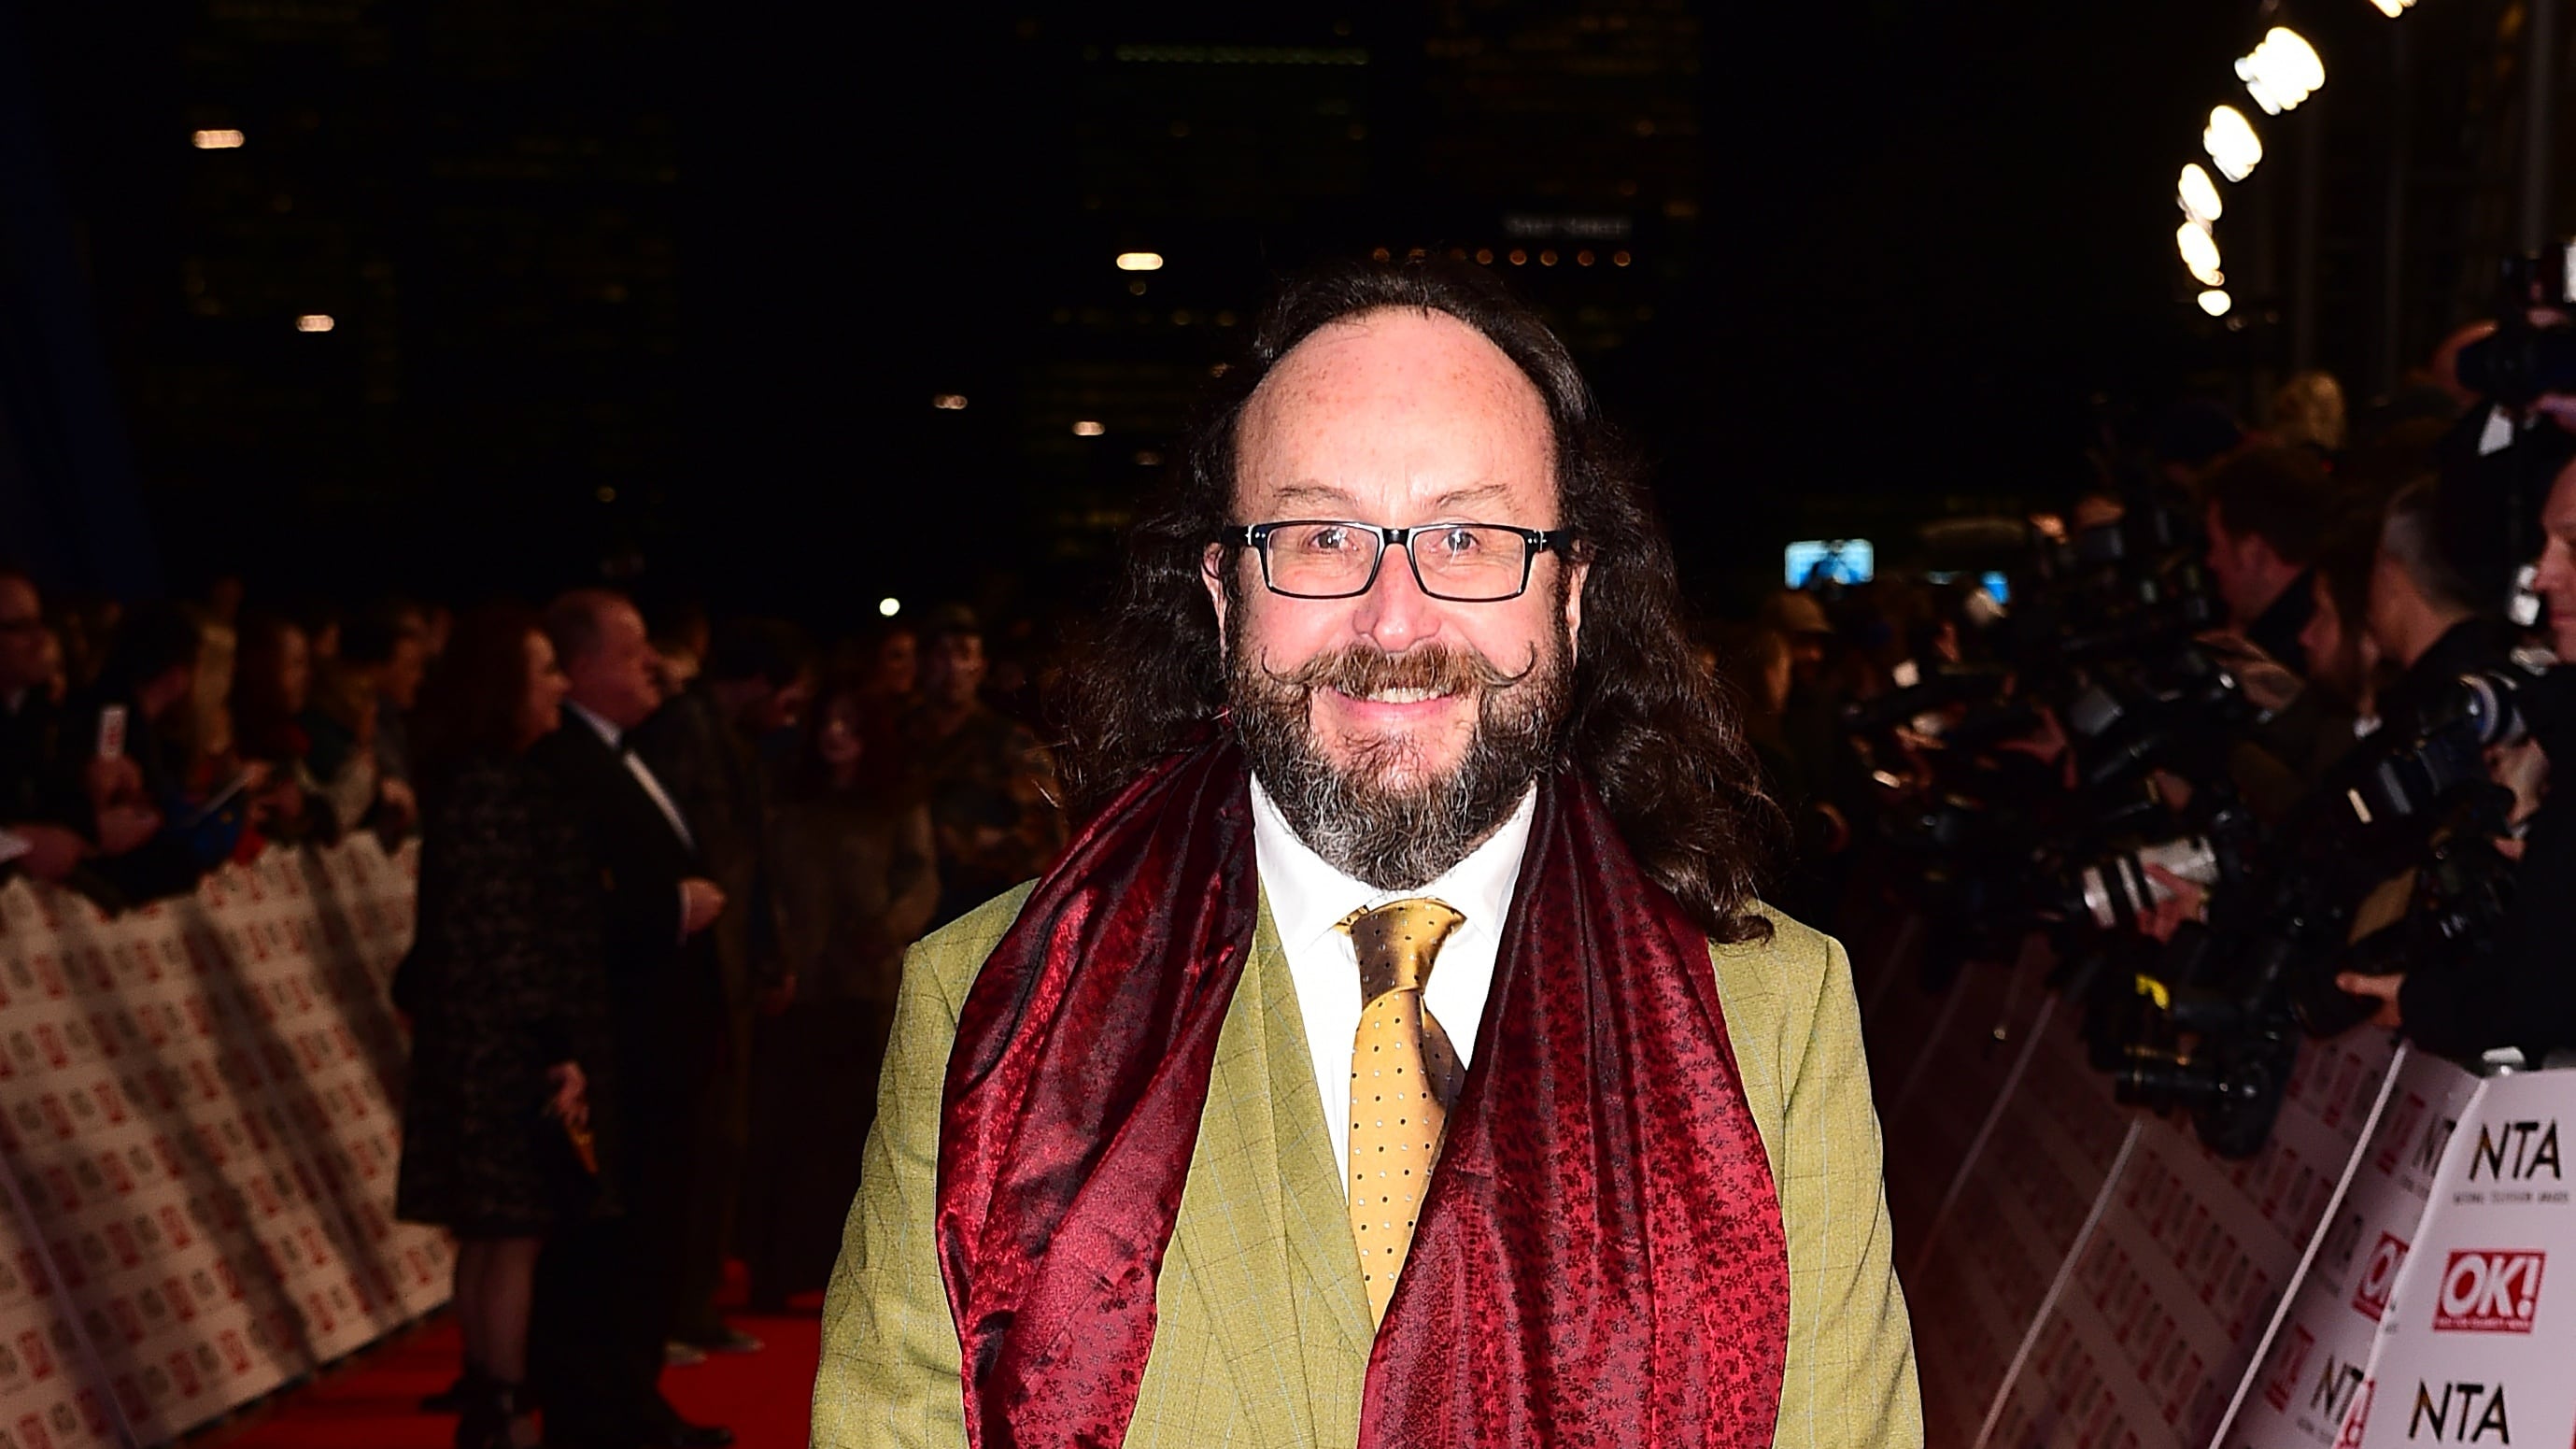 One half of the Hairy Bikers, Dave Myers